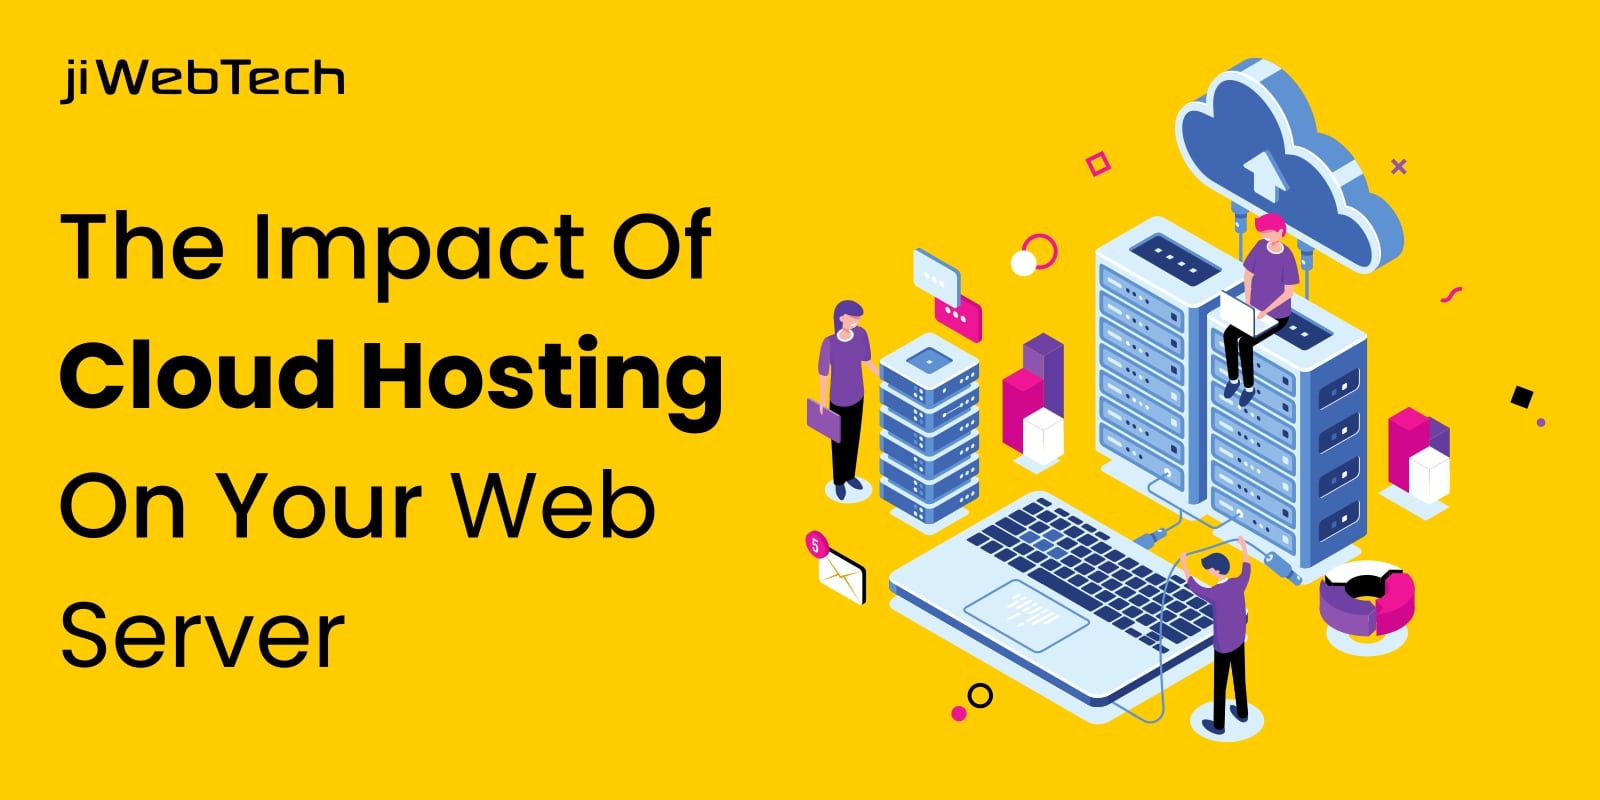 How does Cloud Hosting Impact the Security of your Web Server?